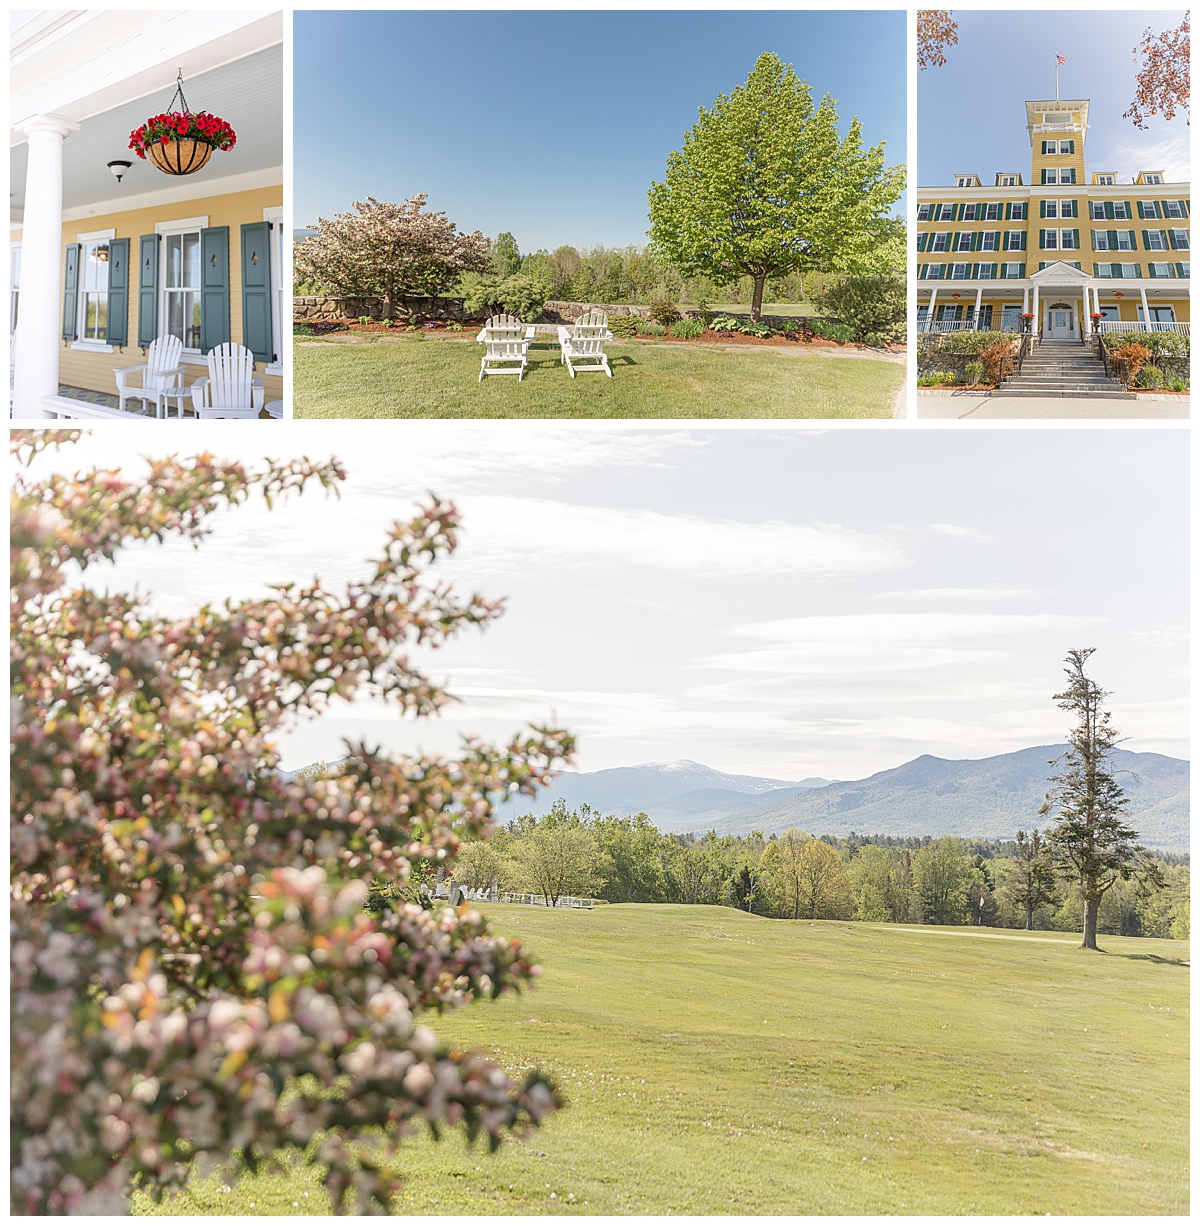 The grounds at the Mountain View Grand Resort offer some of the best mountain vistas in New Hampshire.